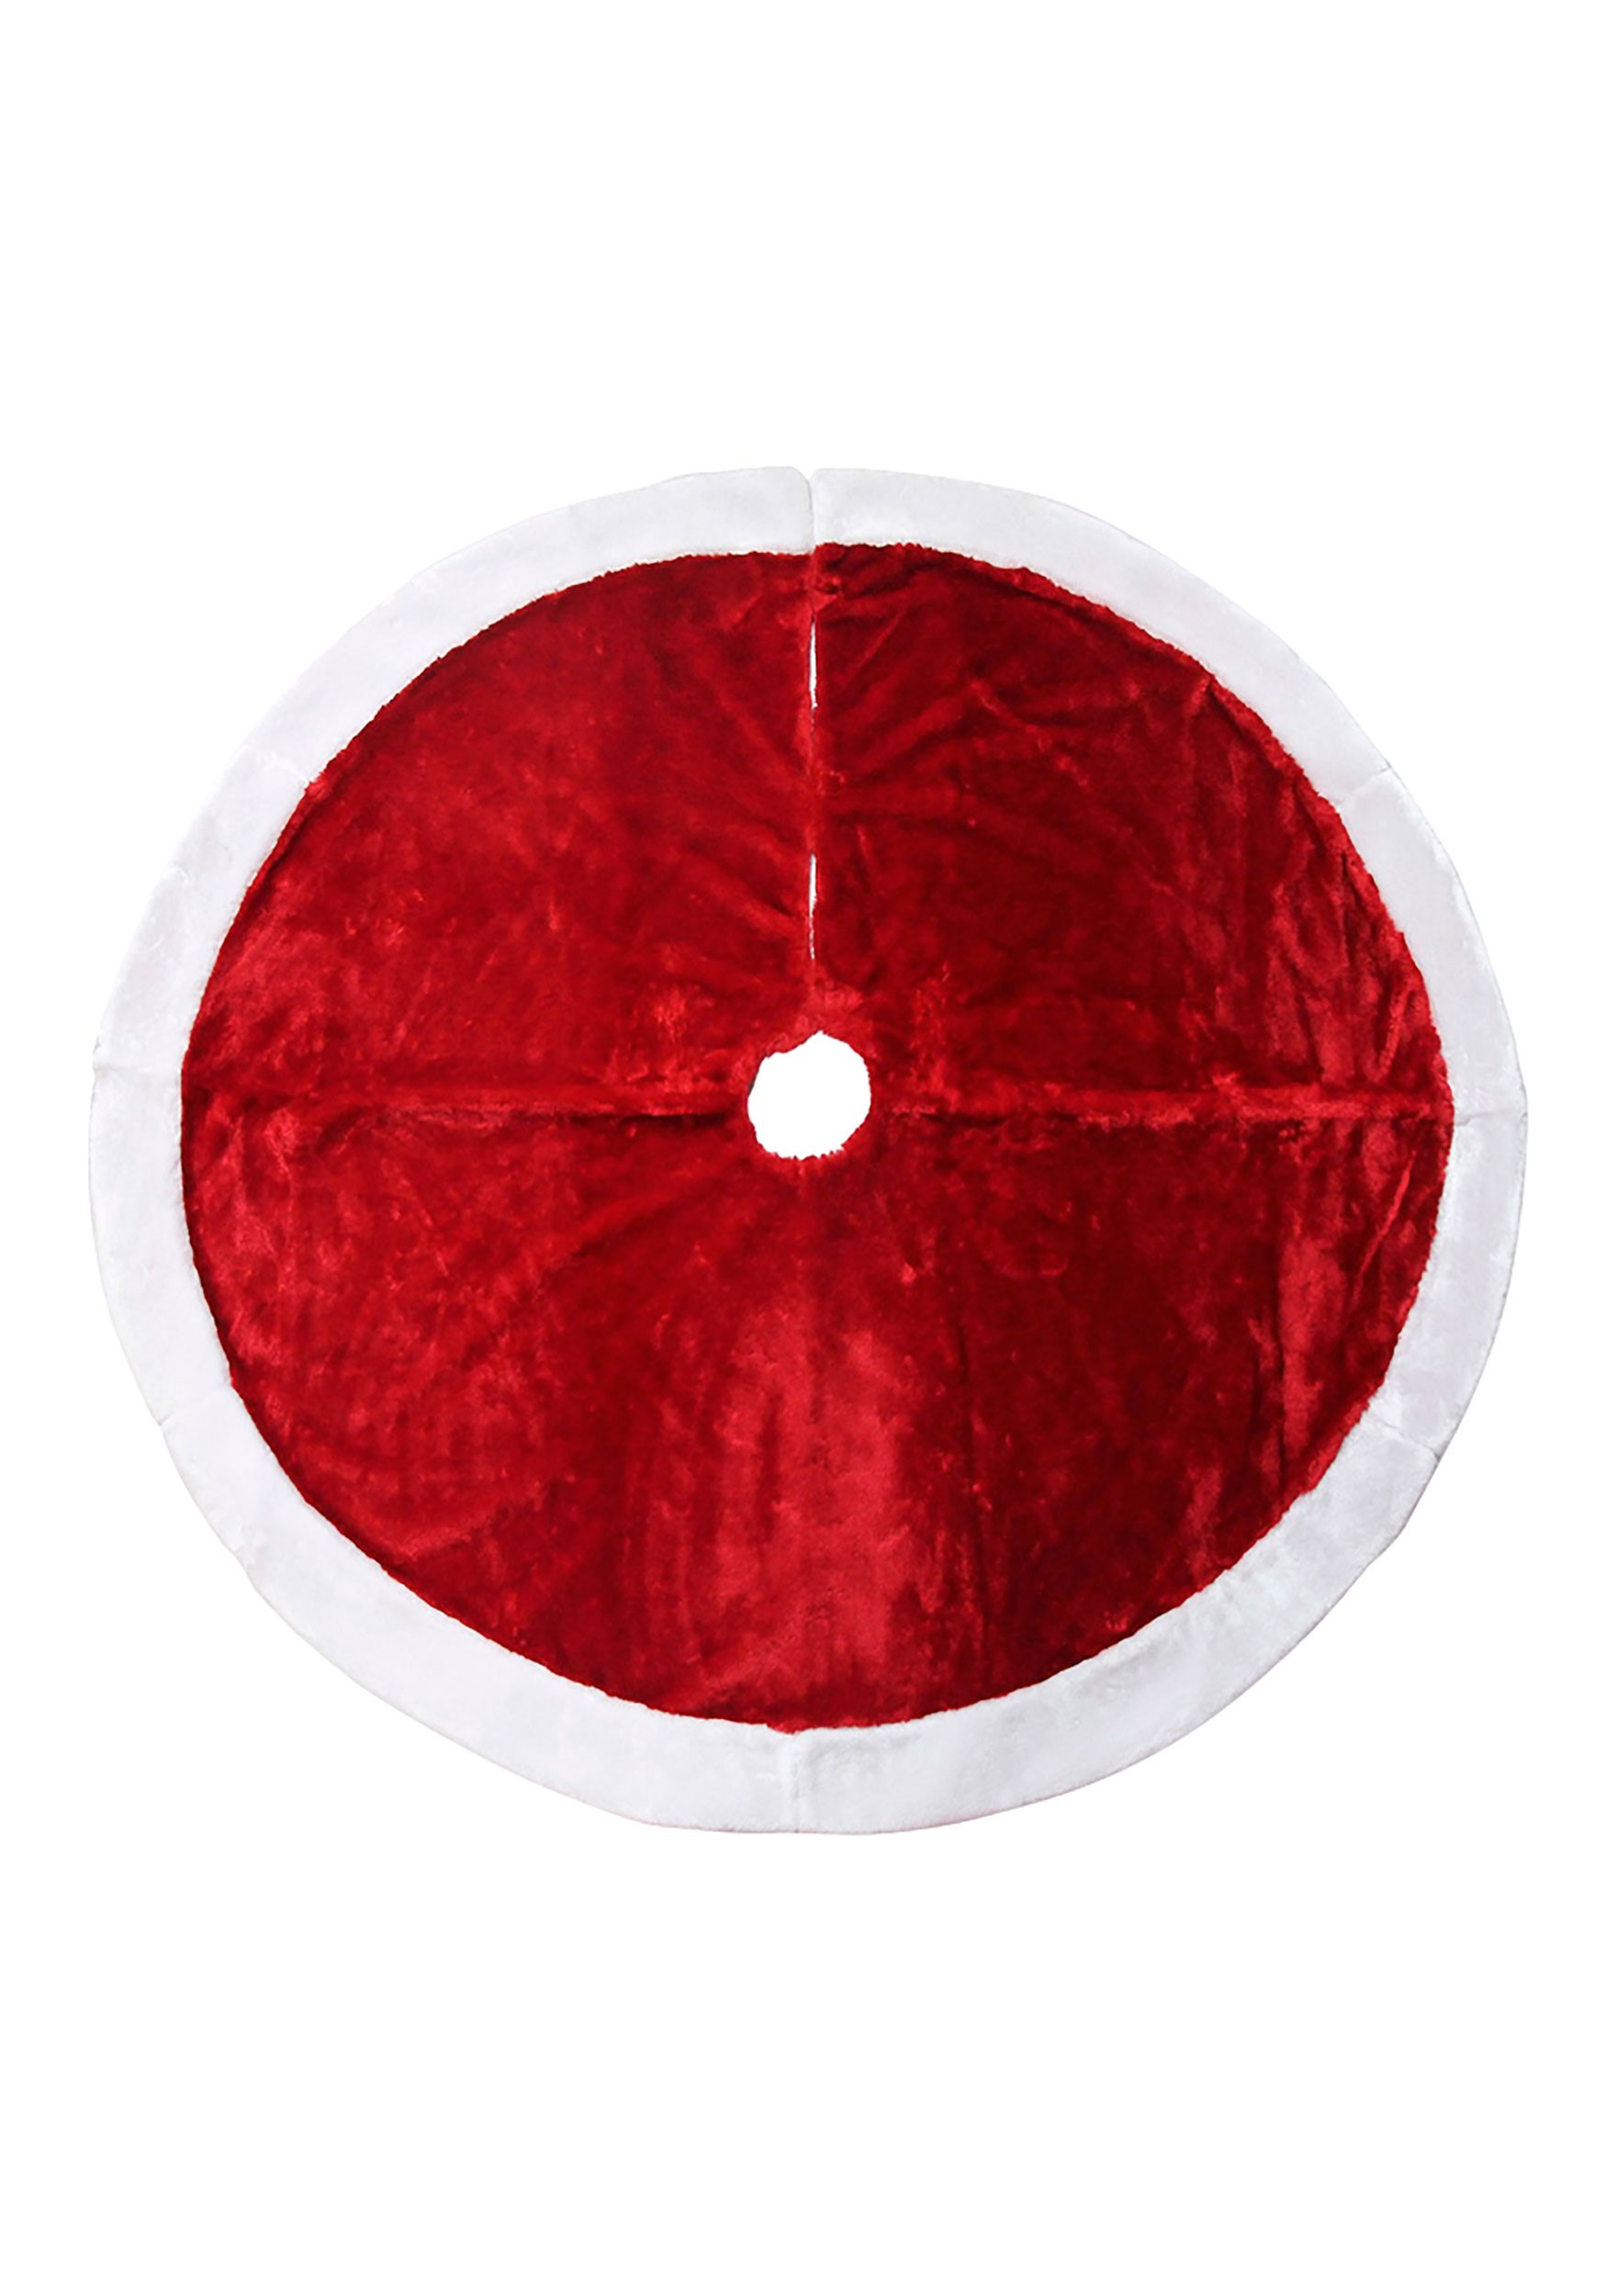 48 Inch Basic Red Christmas Tree Skirt with White Fur